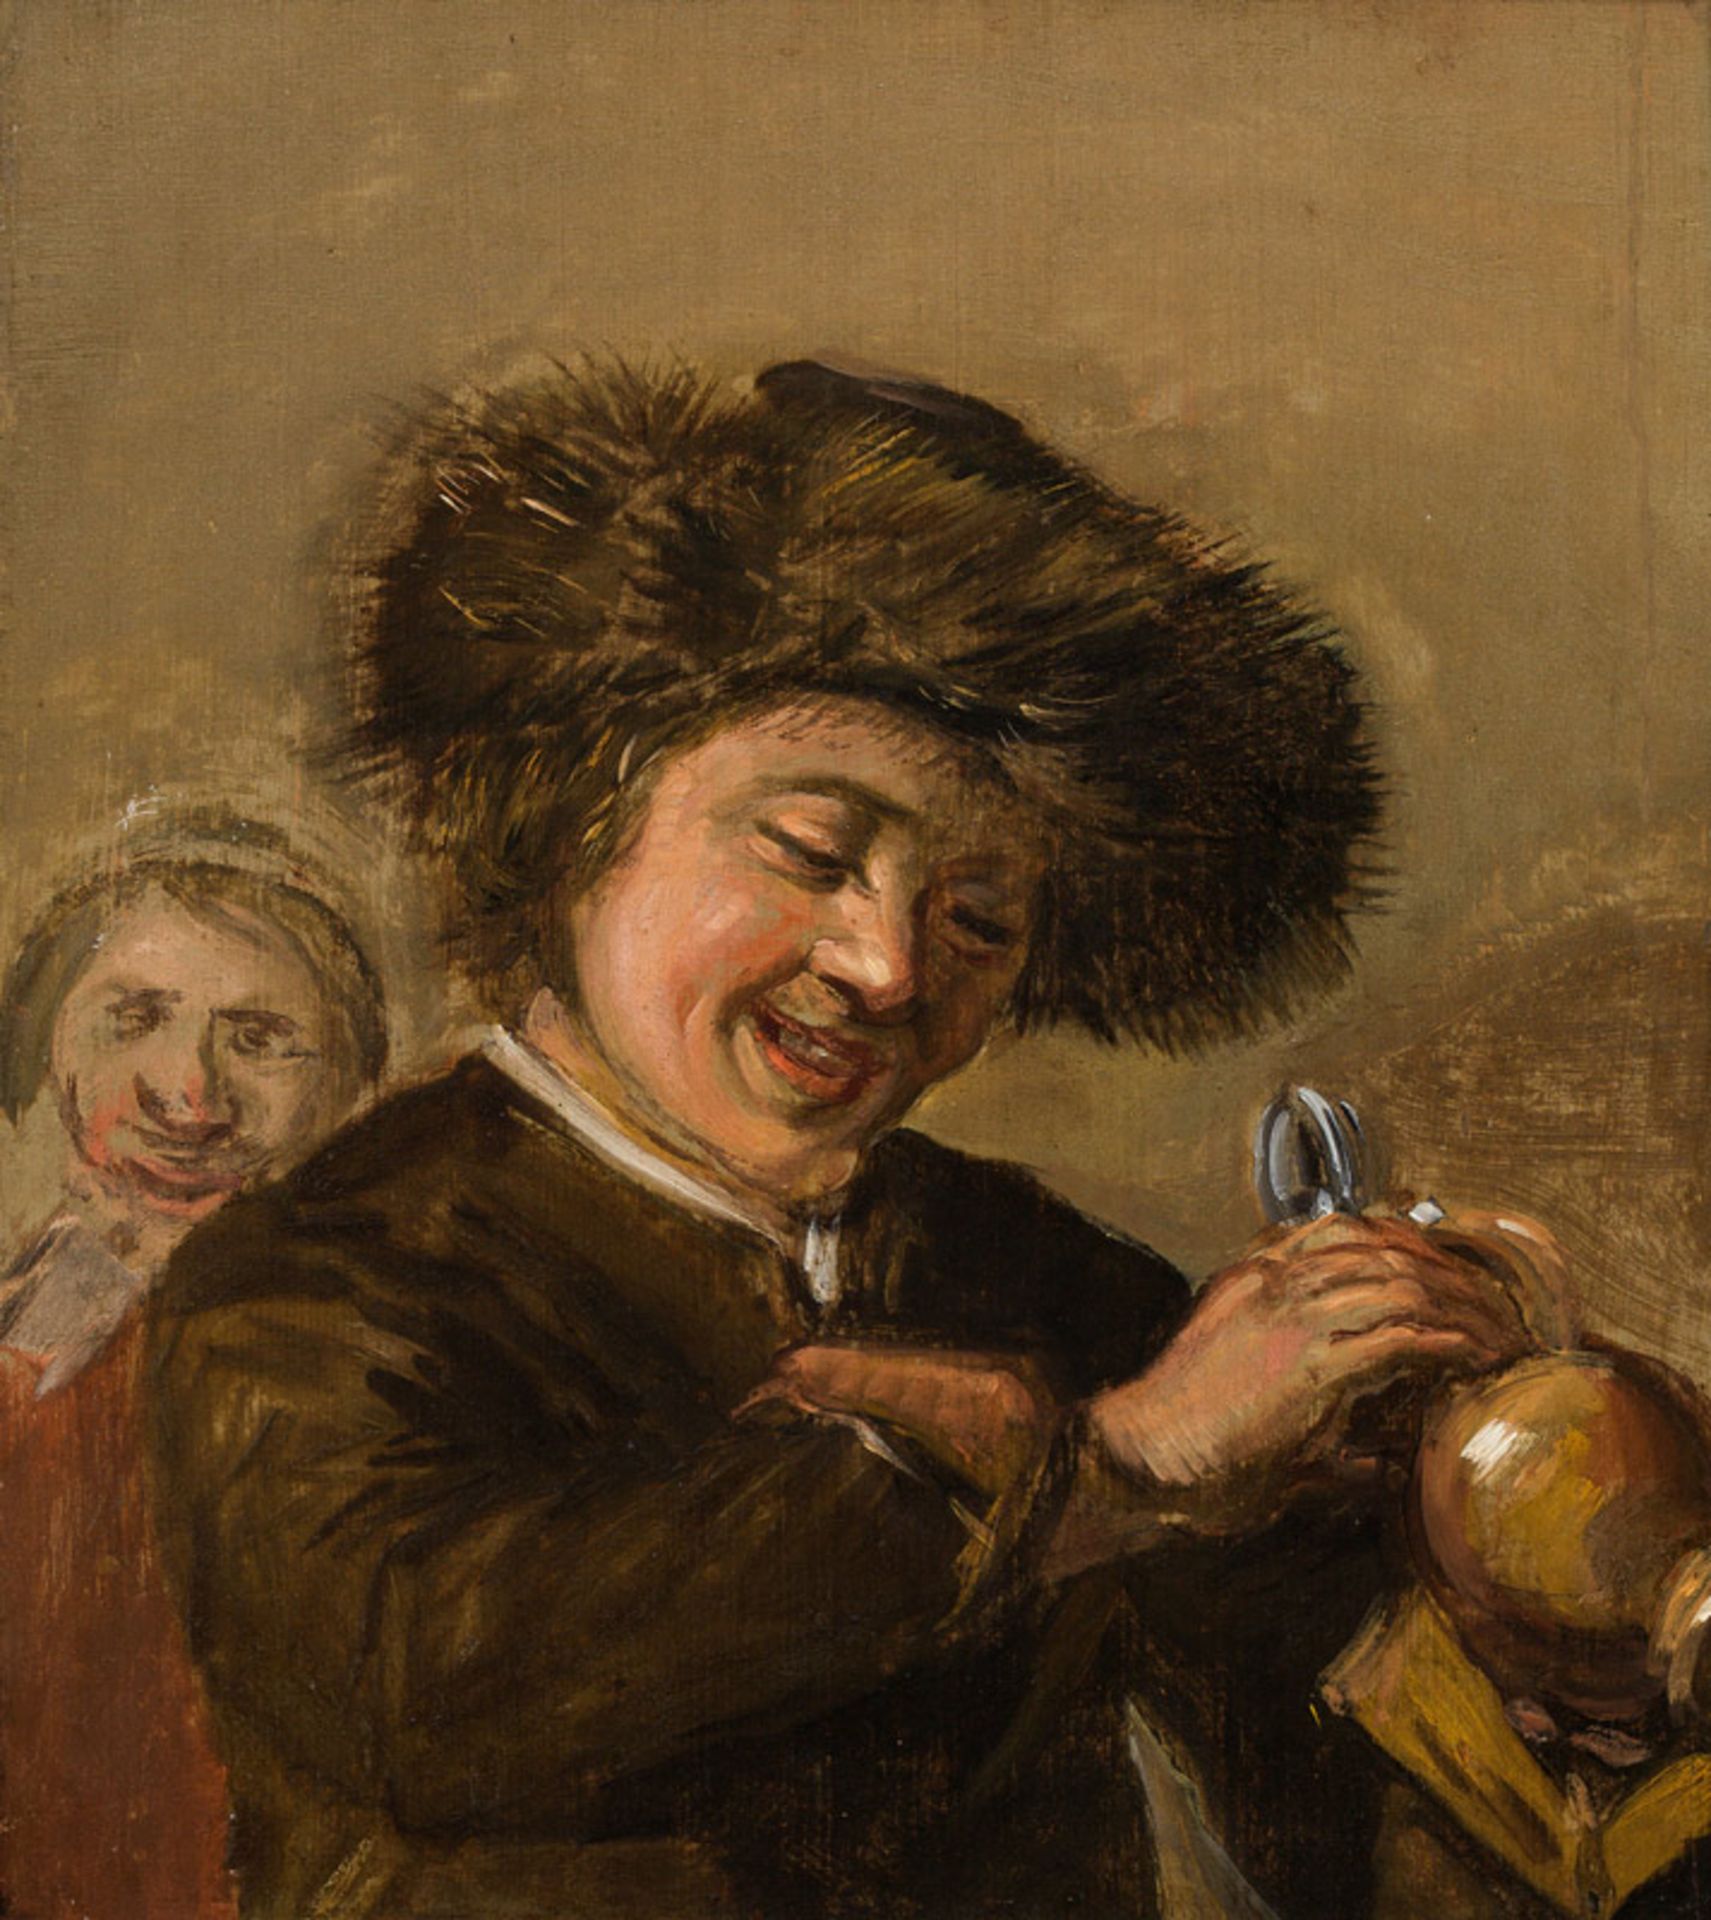 Studio of Frans Hals Laughing boys with a jug, probably c. 1630